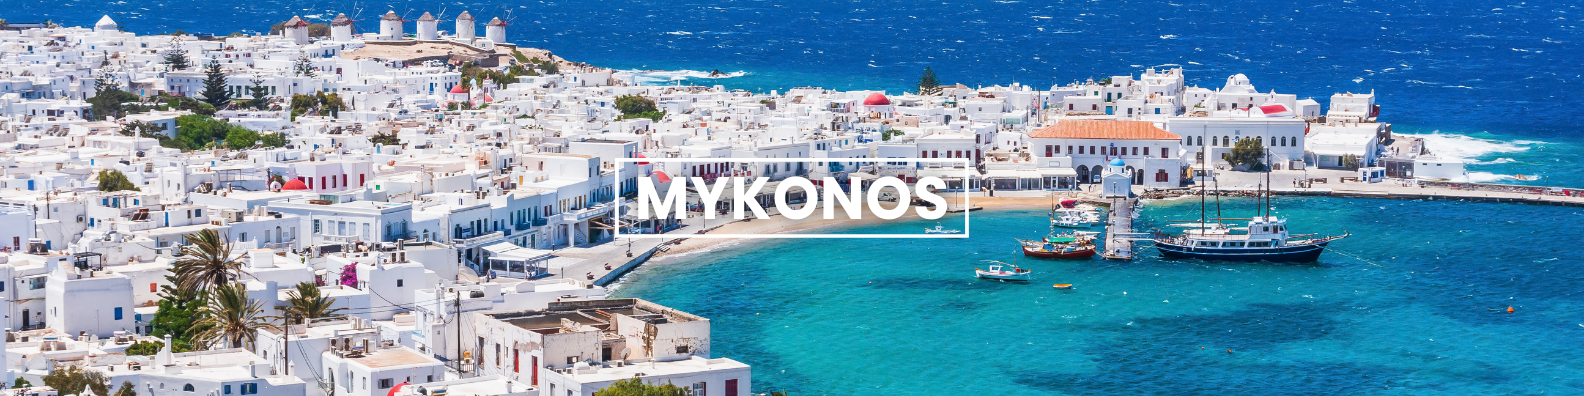 an aerial view of the city of mykonos with boats in the water .